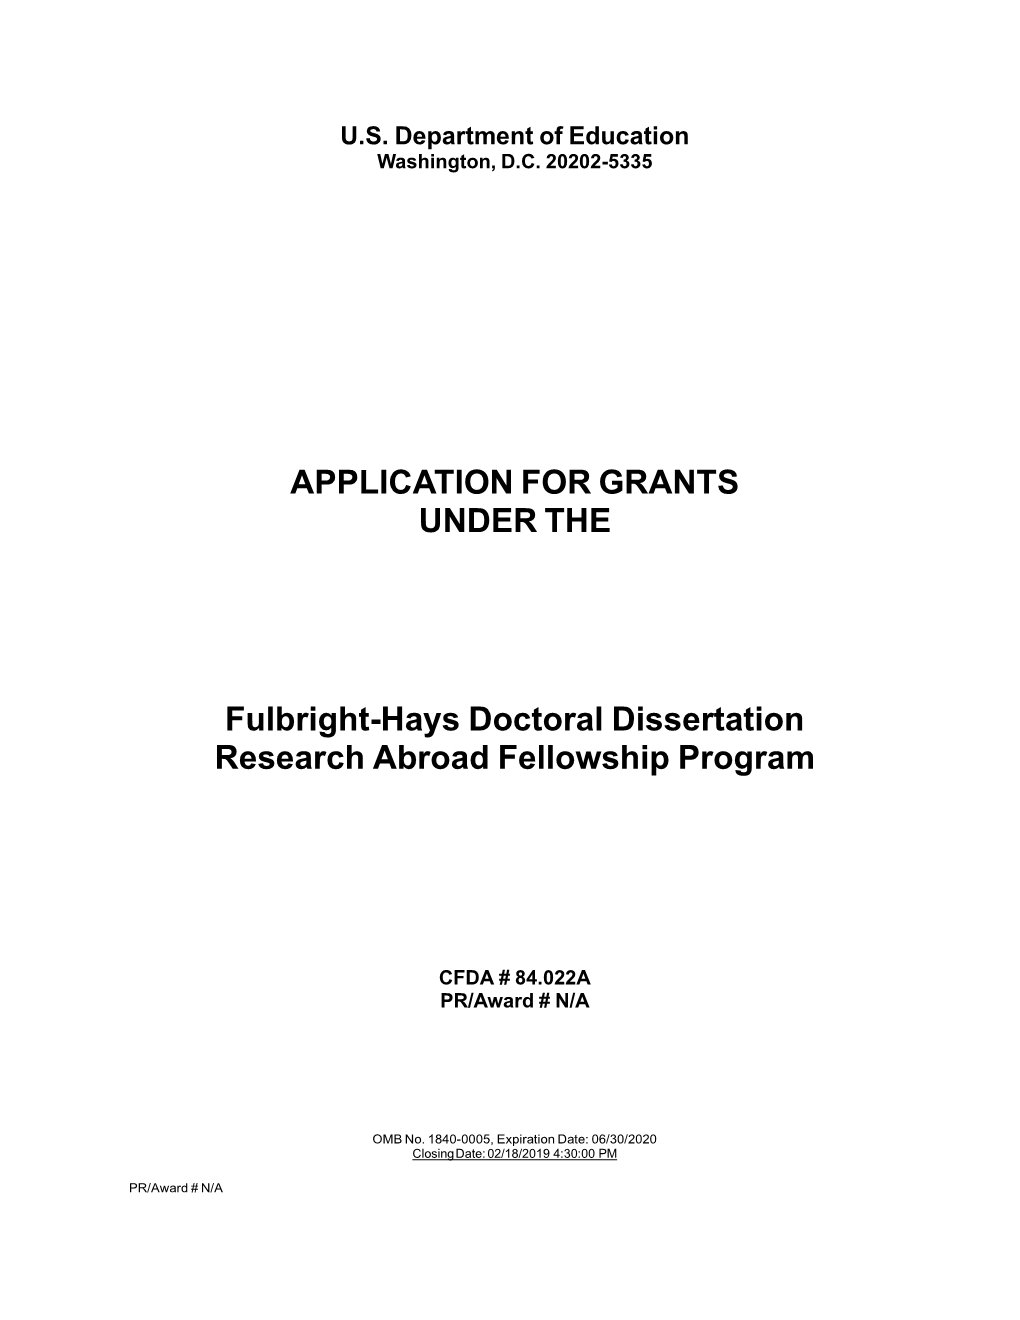 APPLICATION for GRANTS UNDER the Fulbright-Hays Doctoral